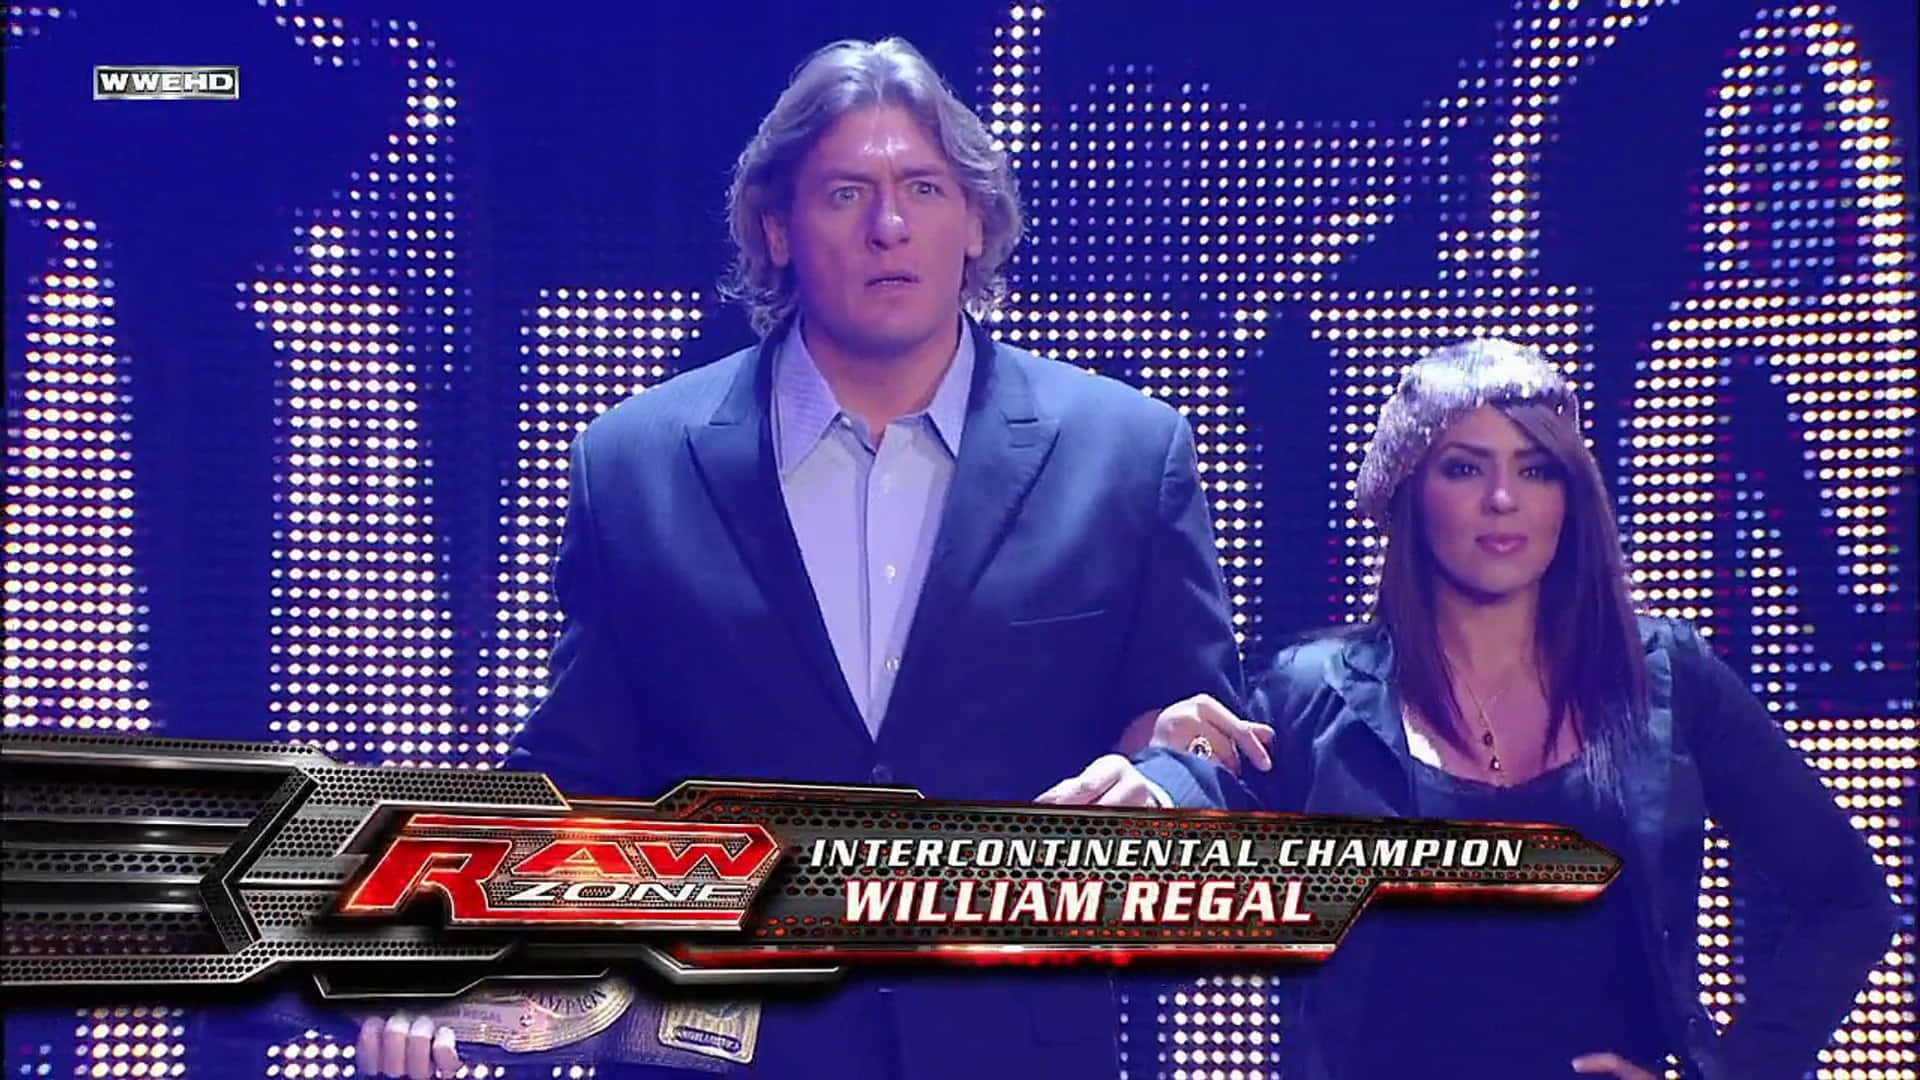 WWE Legend William Regal Standing Firm in the Ring Wallpaper